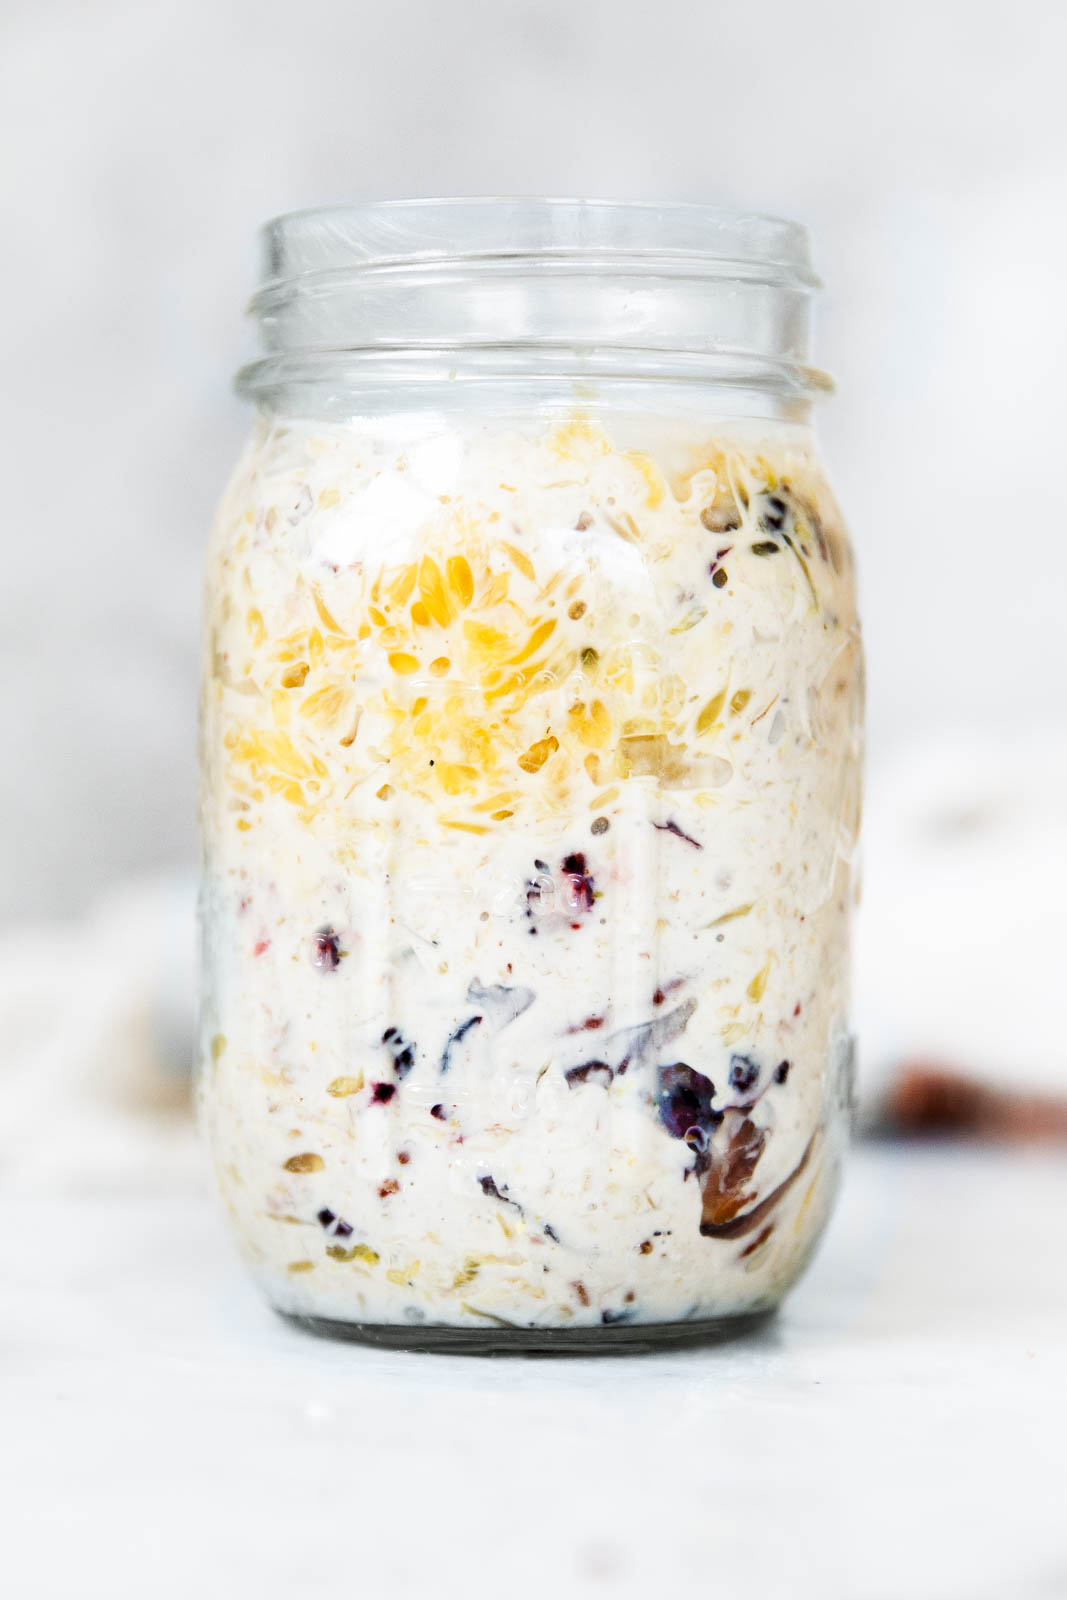 Overnight oats are a simple and nutritious breakfast all year round. This version, with dried cranberries, orange, and Valdosta pecans, is insanely delicious!